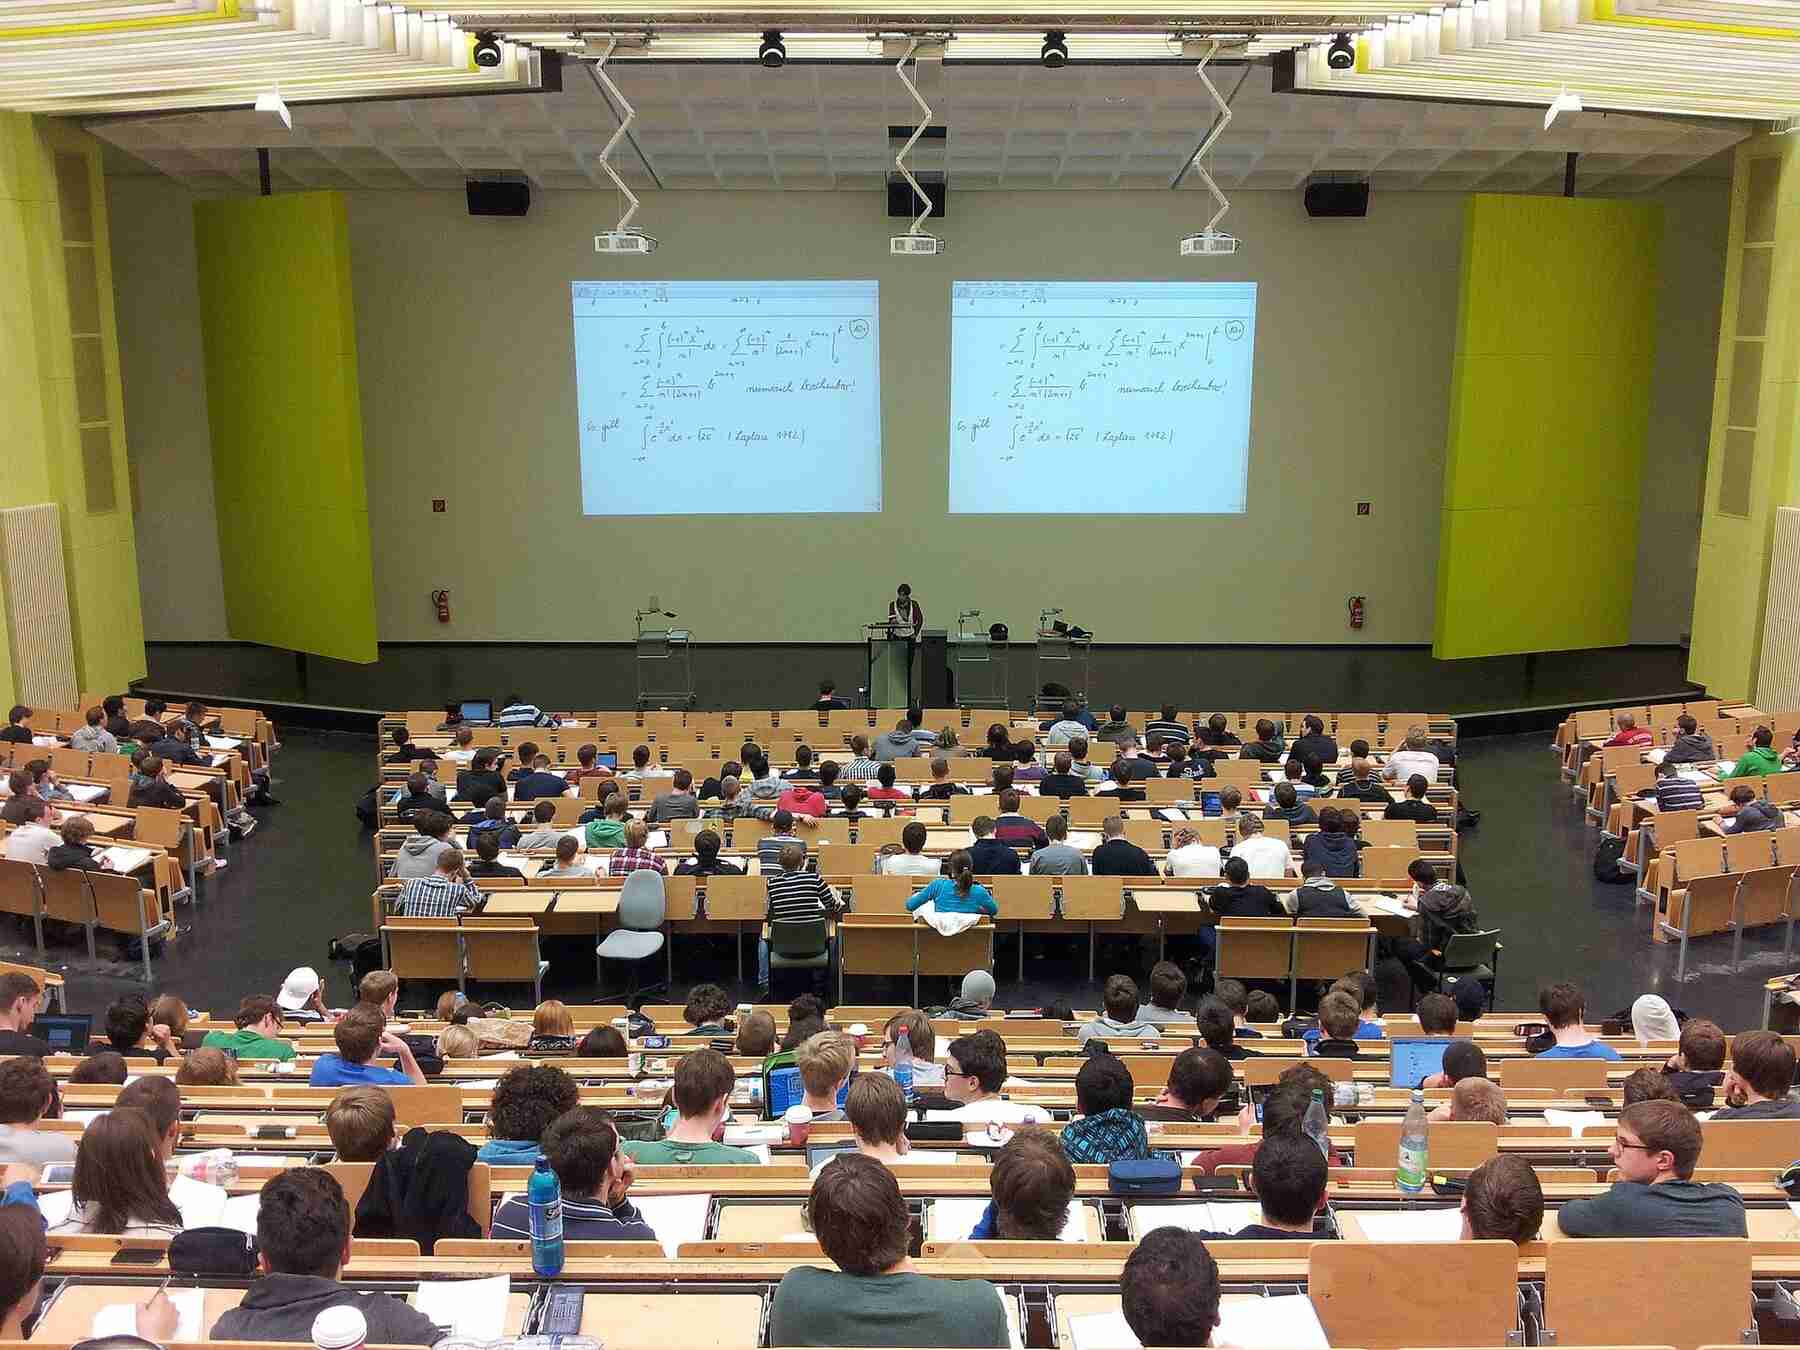 Classroom full of students